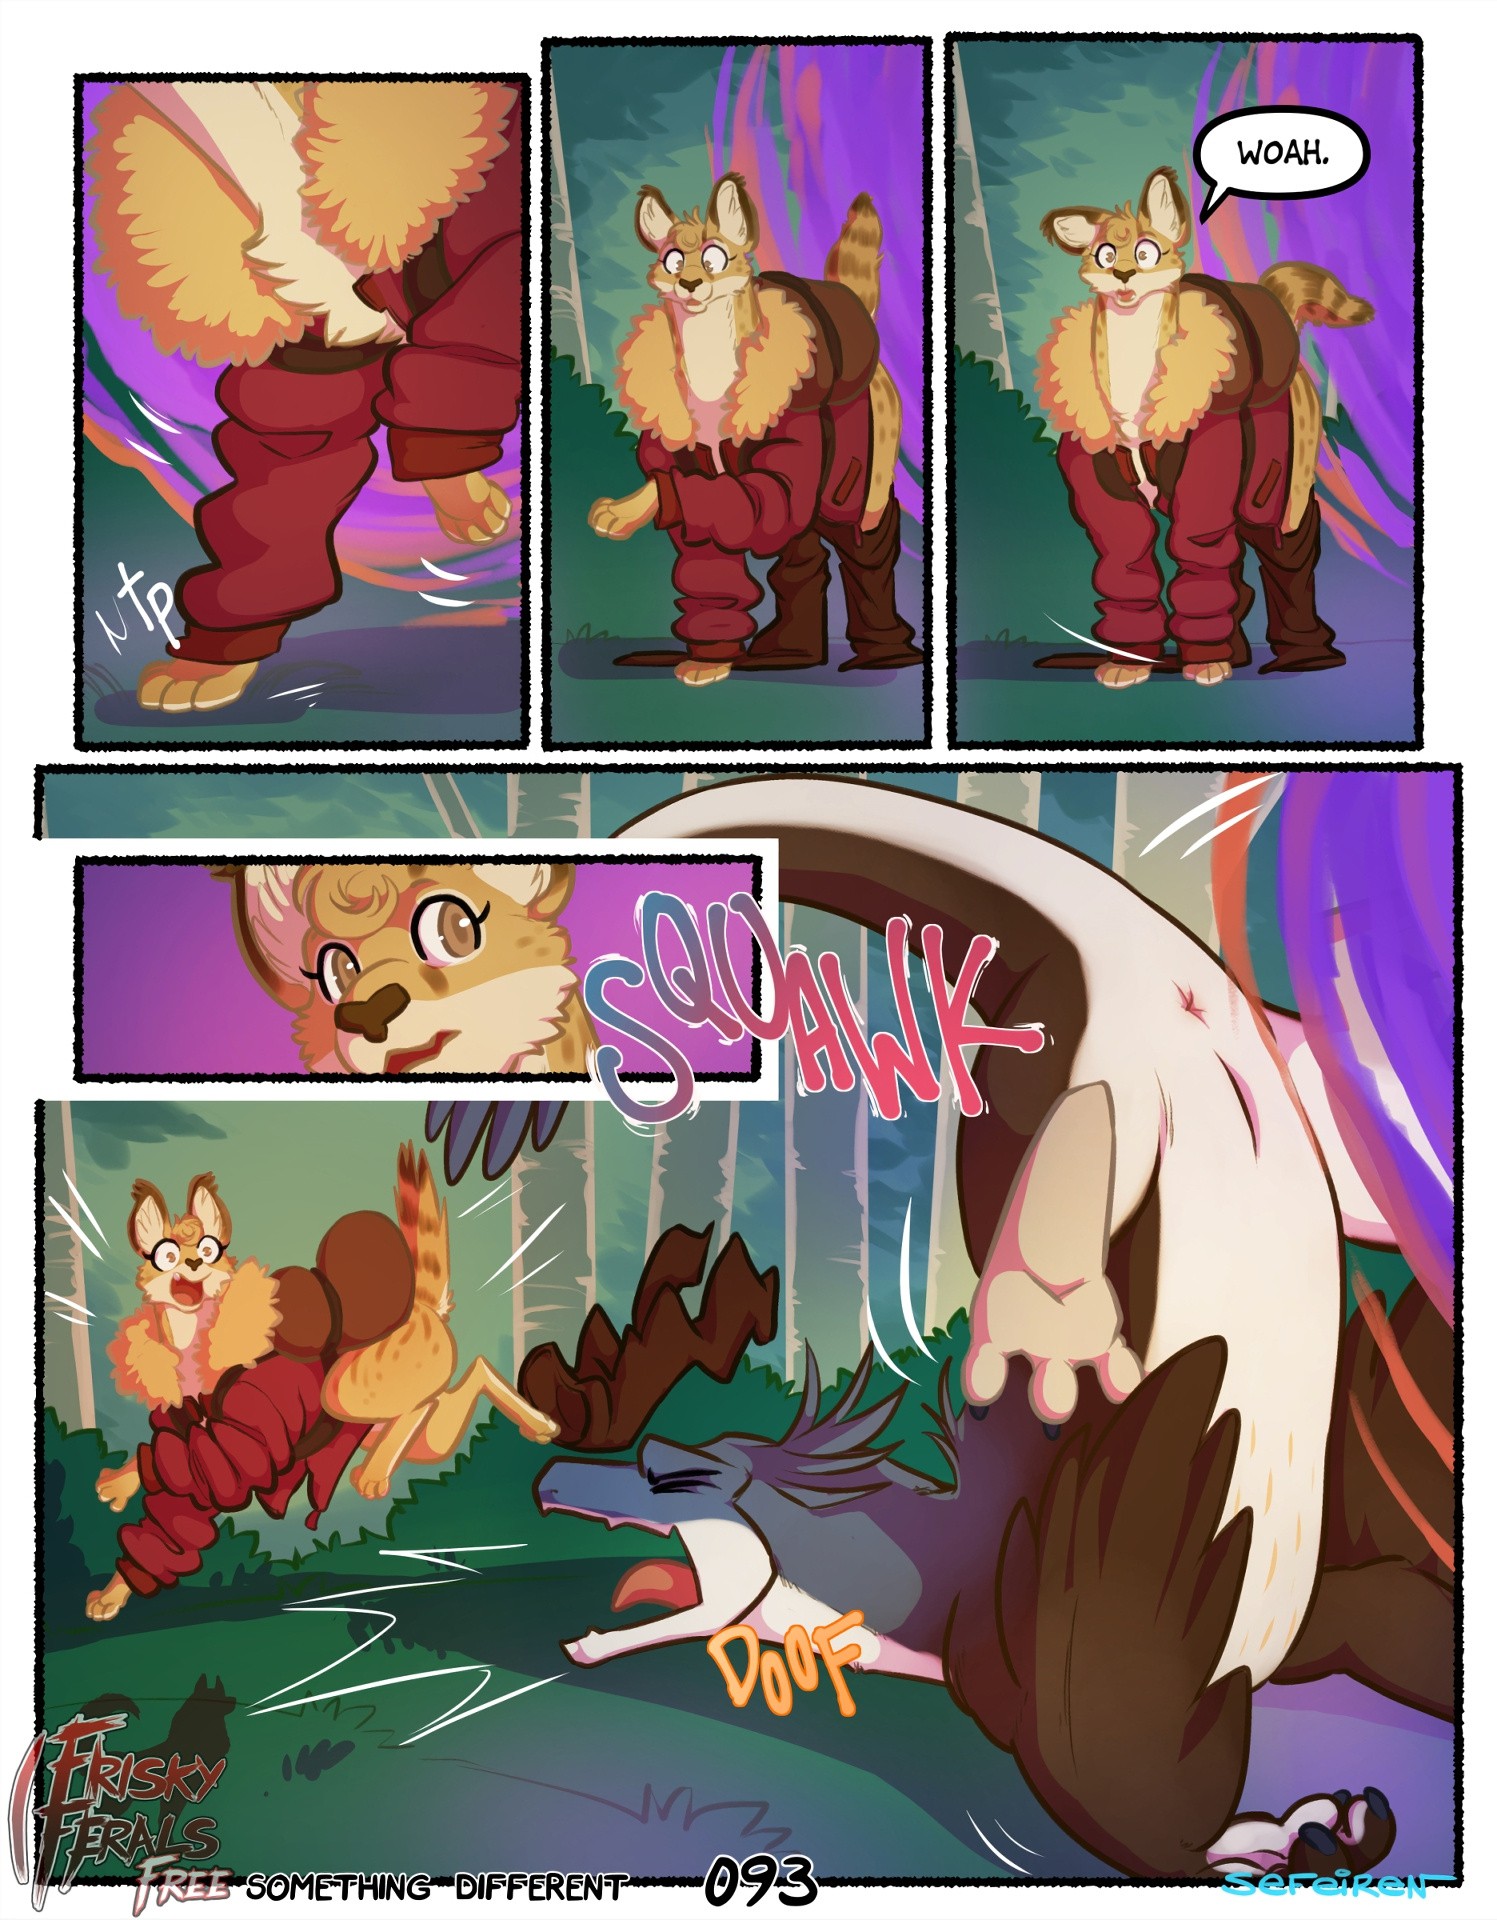 Frisky Ferals - Something Different porn comic picture 93